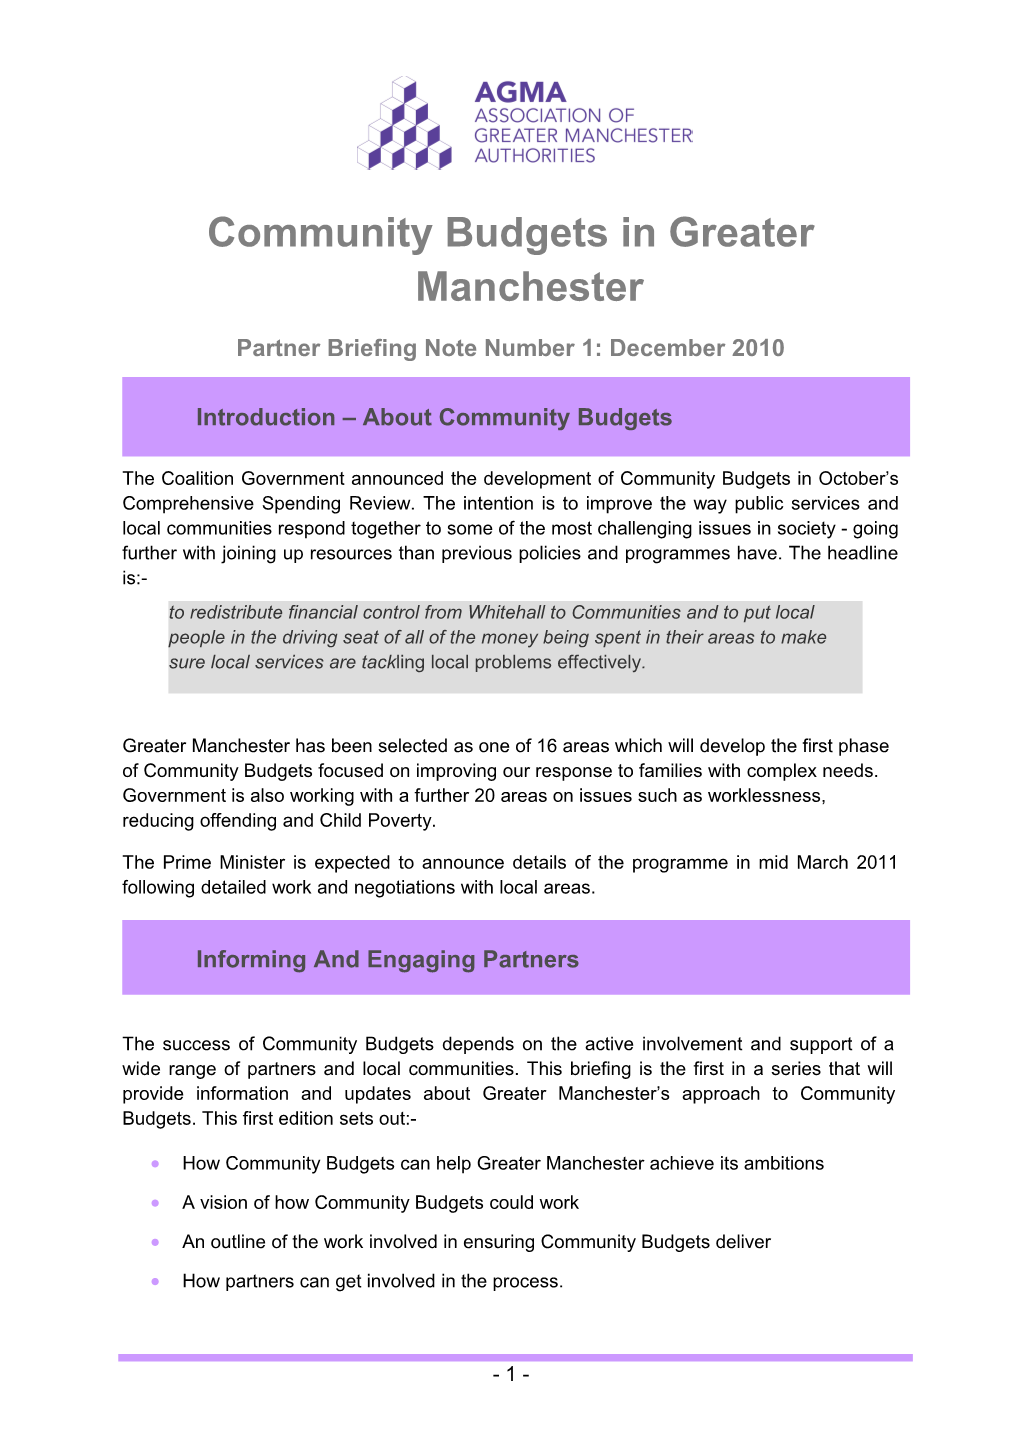 A Greater Manchester Community Budget